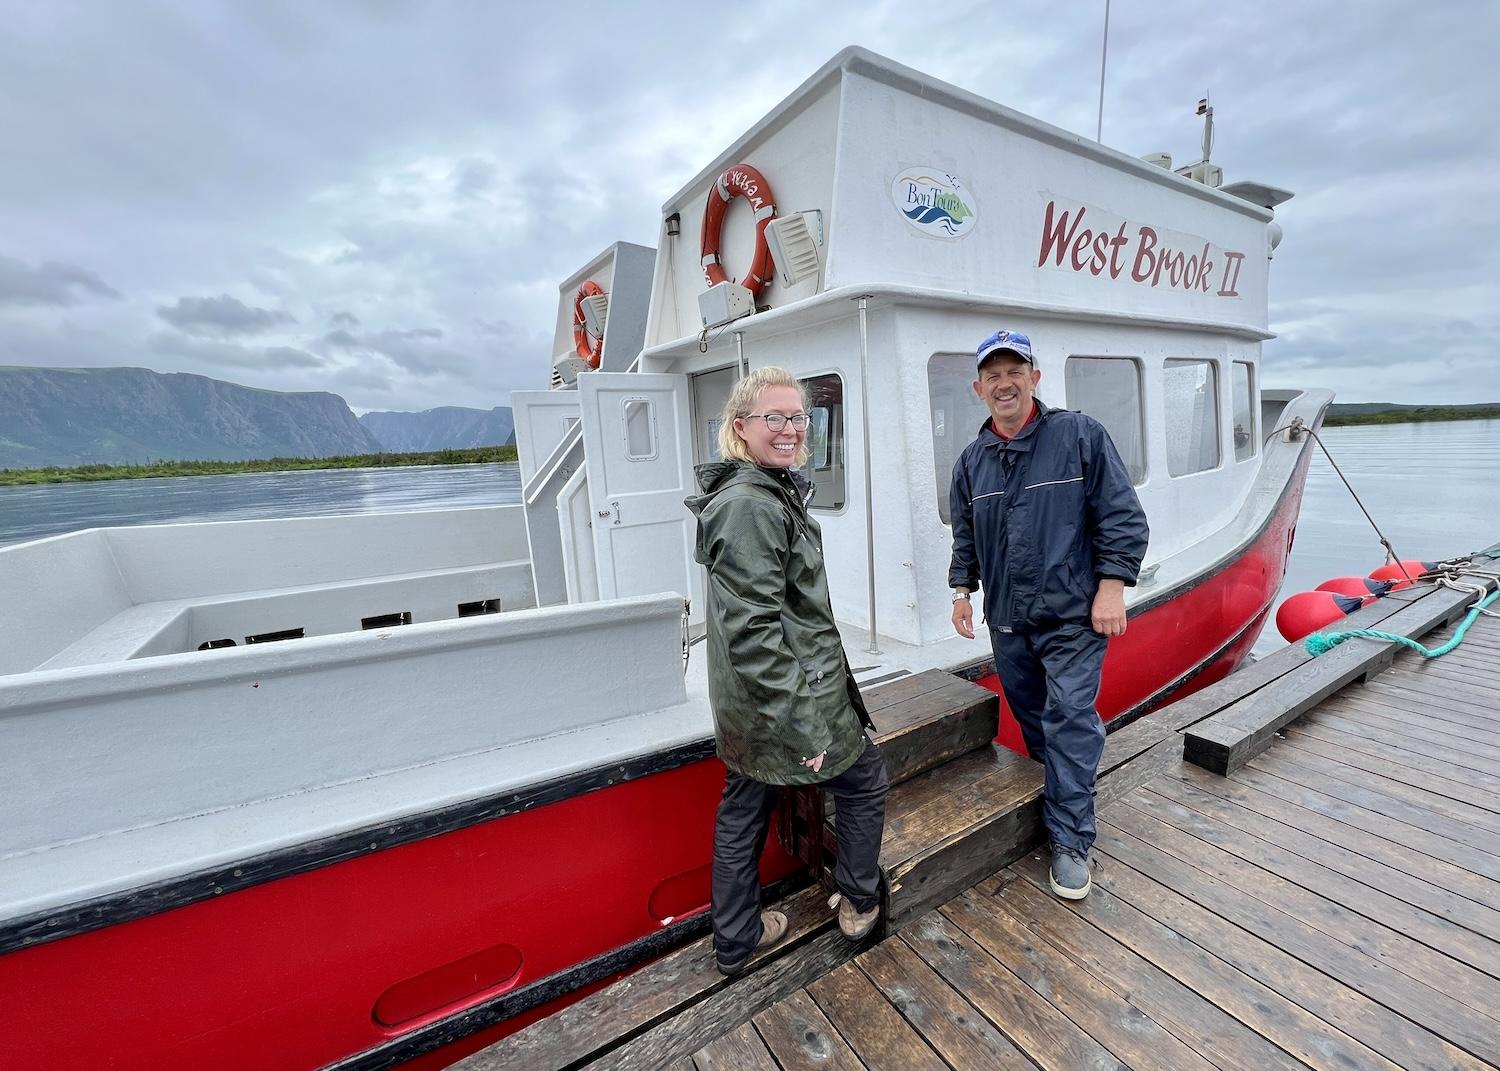 Shelley Hann and Glen Laing, tour guides with BonTours, stand by the West Brook II after a trip on Western Brook Pond in Gros Morne National Park.